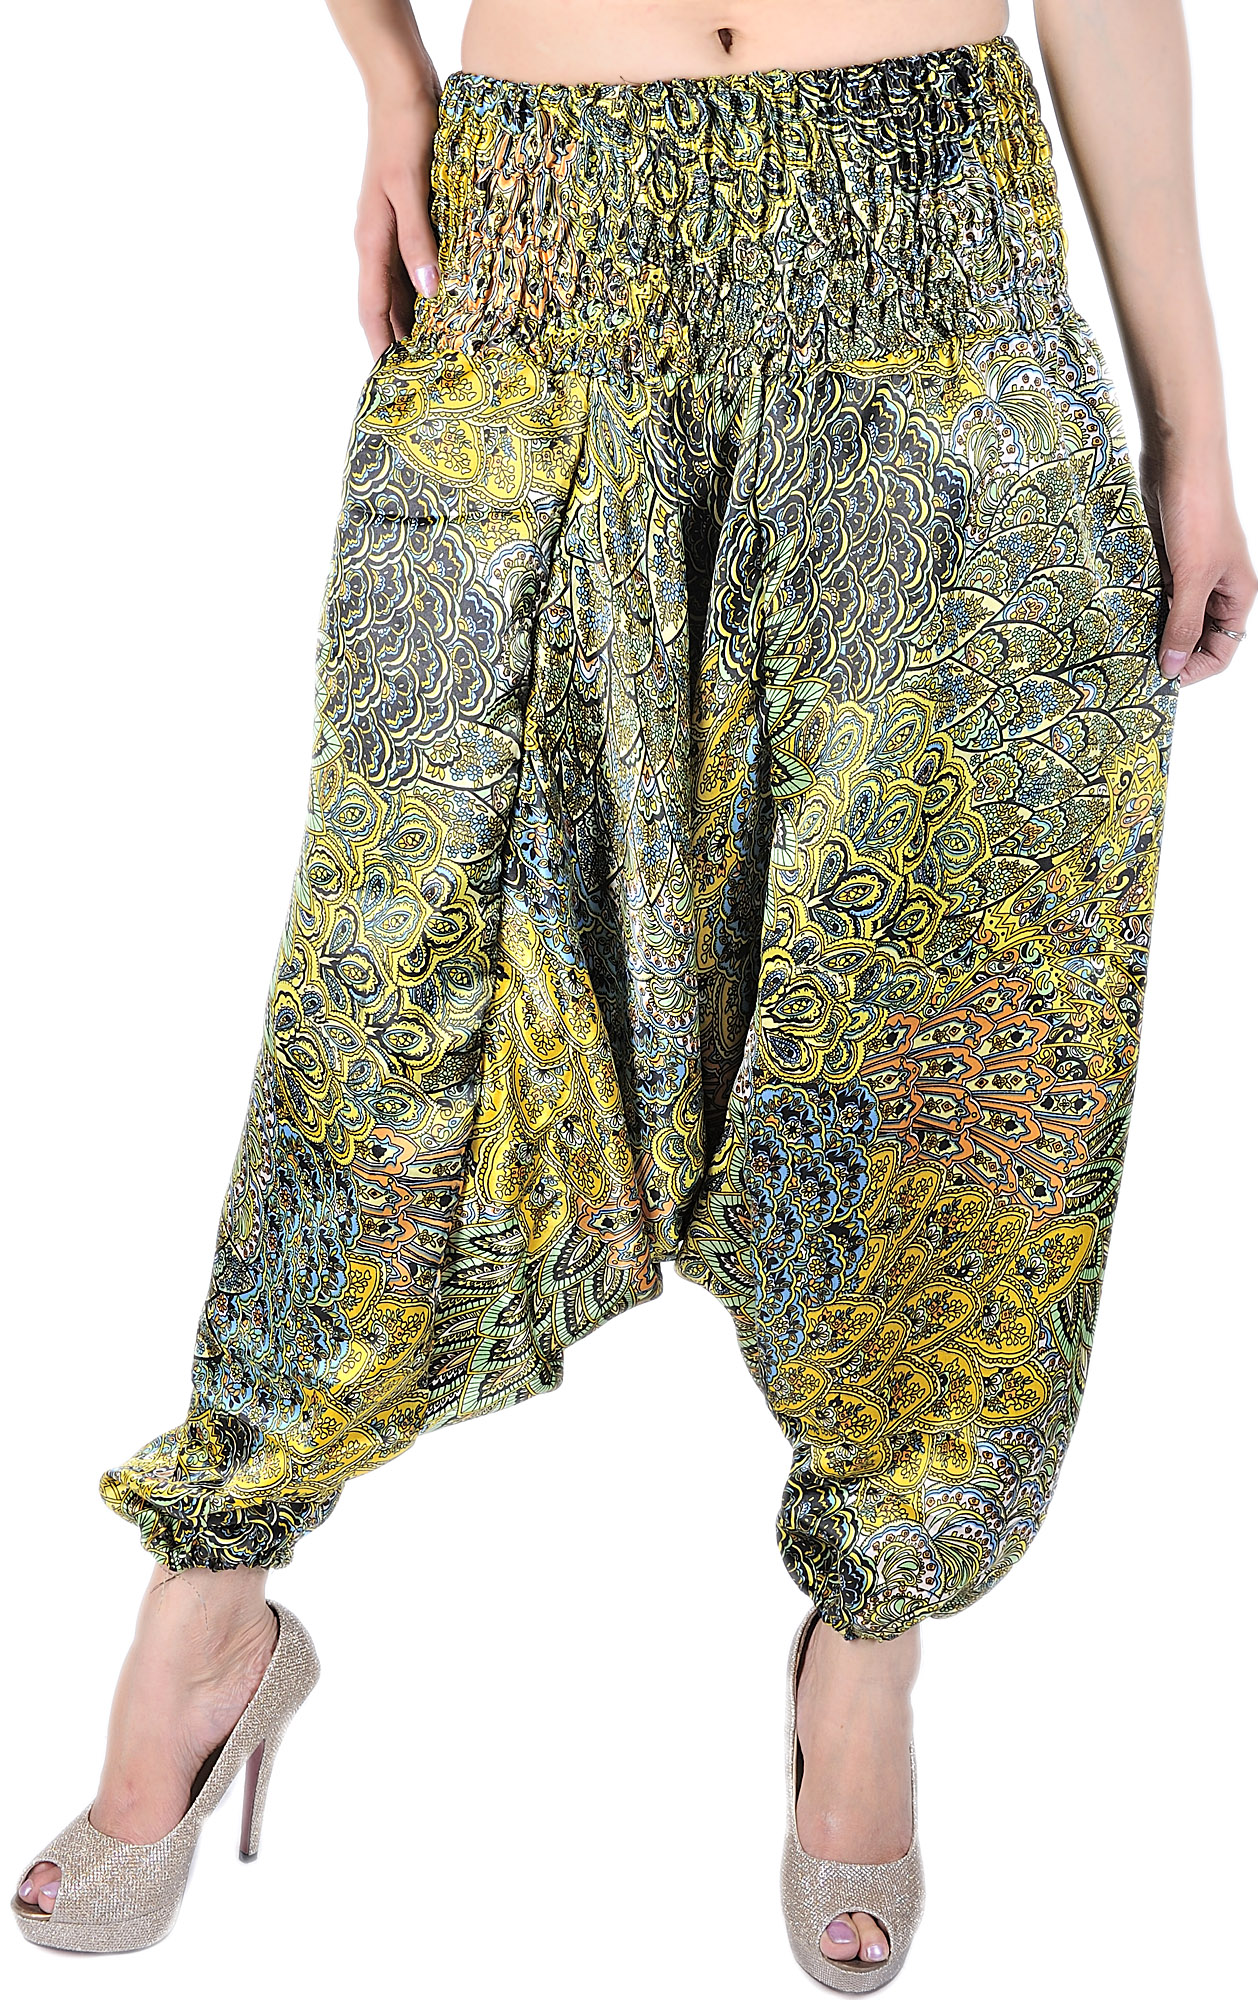 Printed Men's Cotton Harem Pants Free Size at Rs 220/piece in Jaipur | ID:  2852719321830